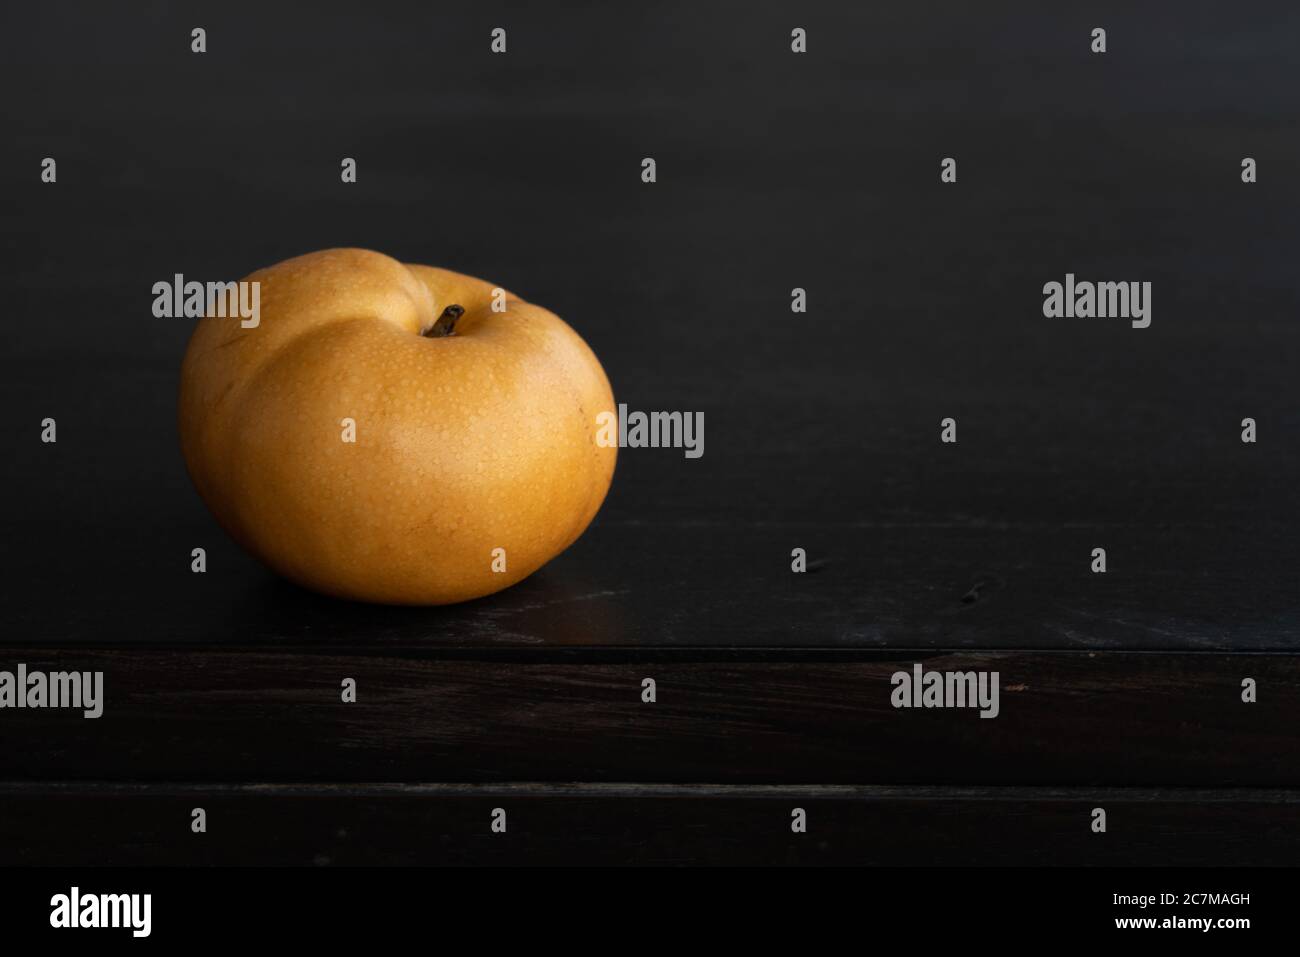 Closeup shot of a fresh man shui pear on a dark surface - perfect for wallpapers Stock Photo